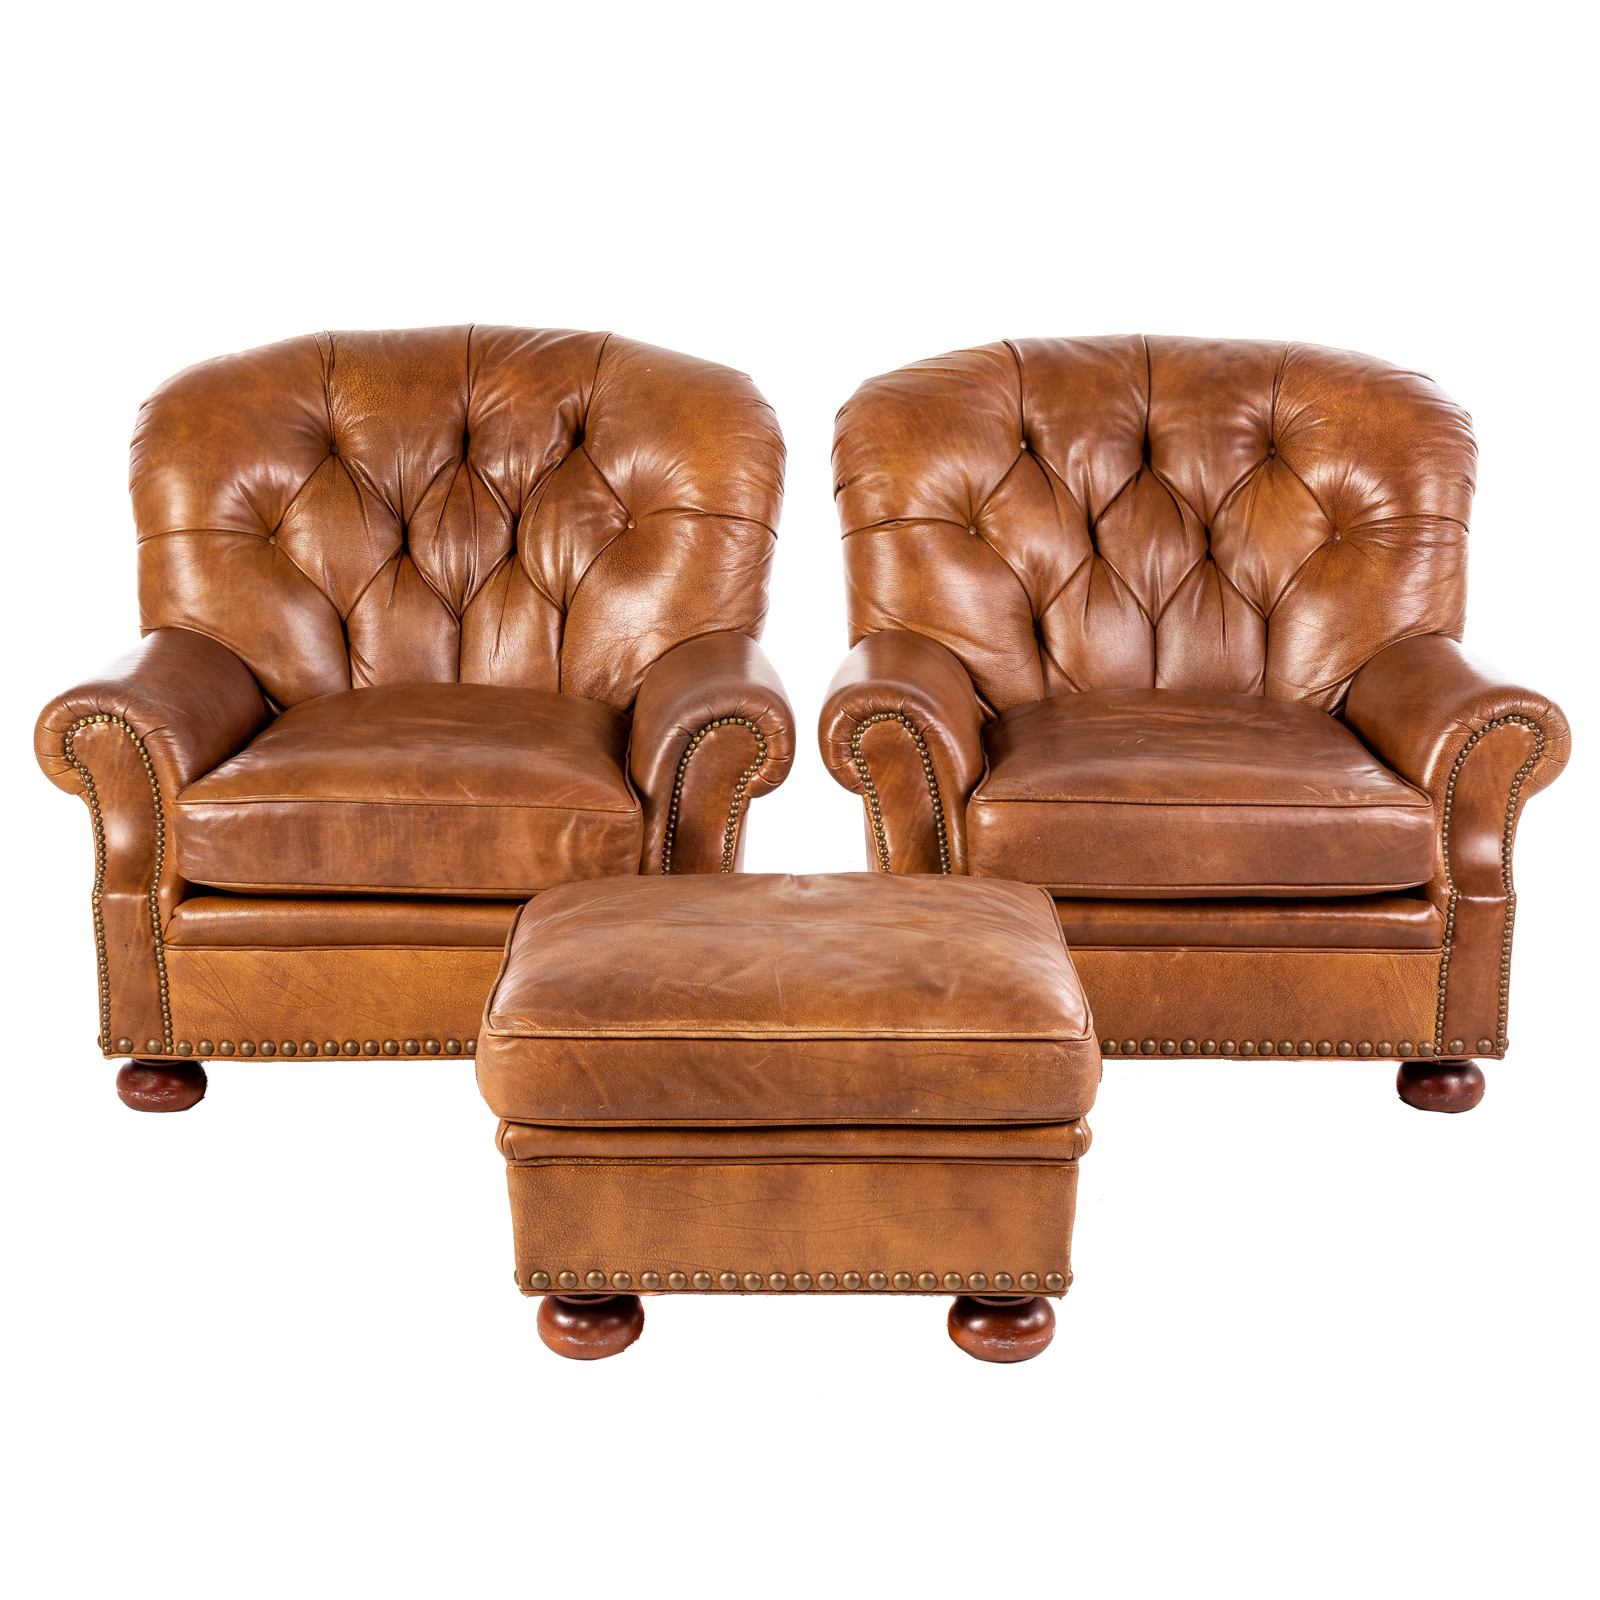 A PAIR OF TUFTED LEATHER ARM CHAIRS 29e93b